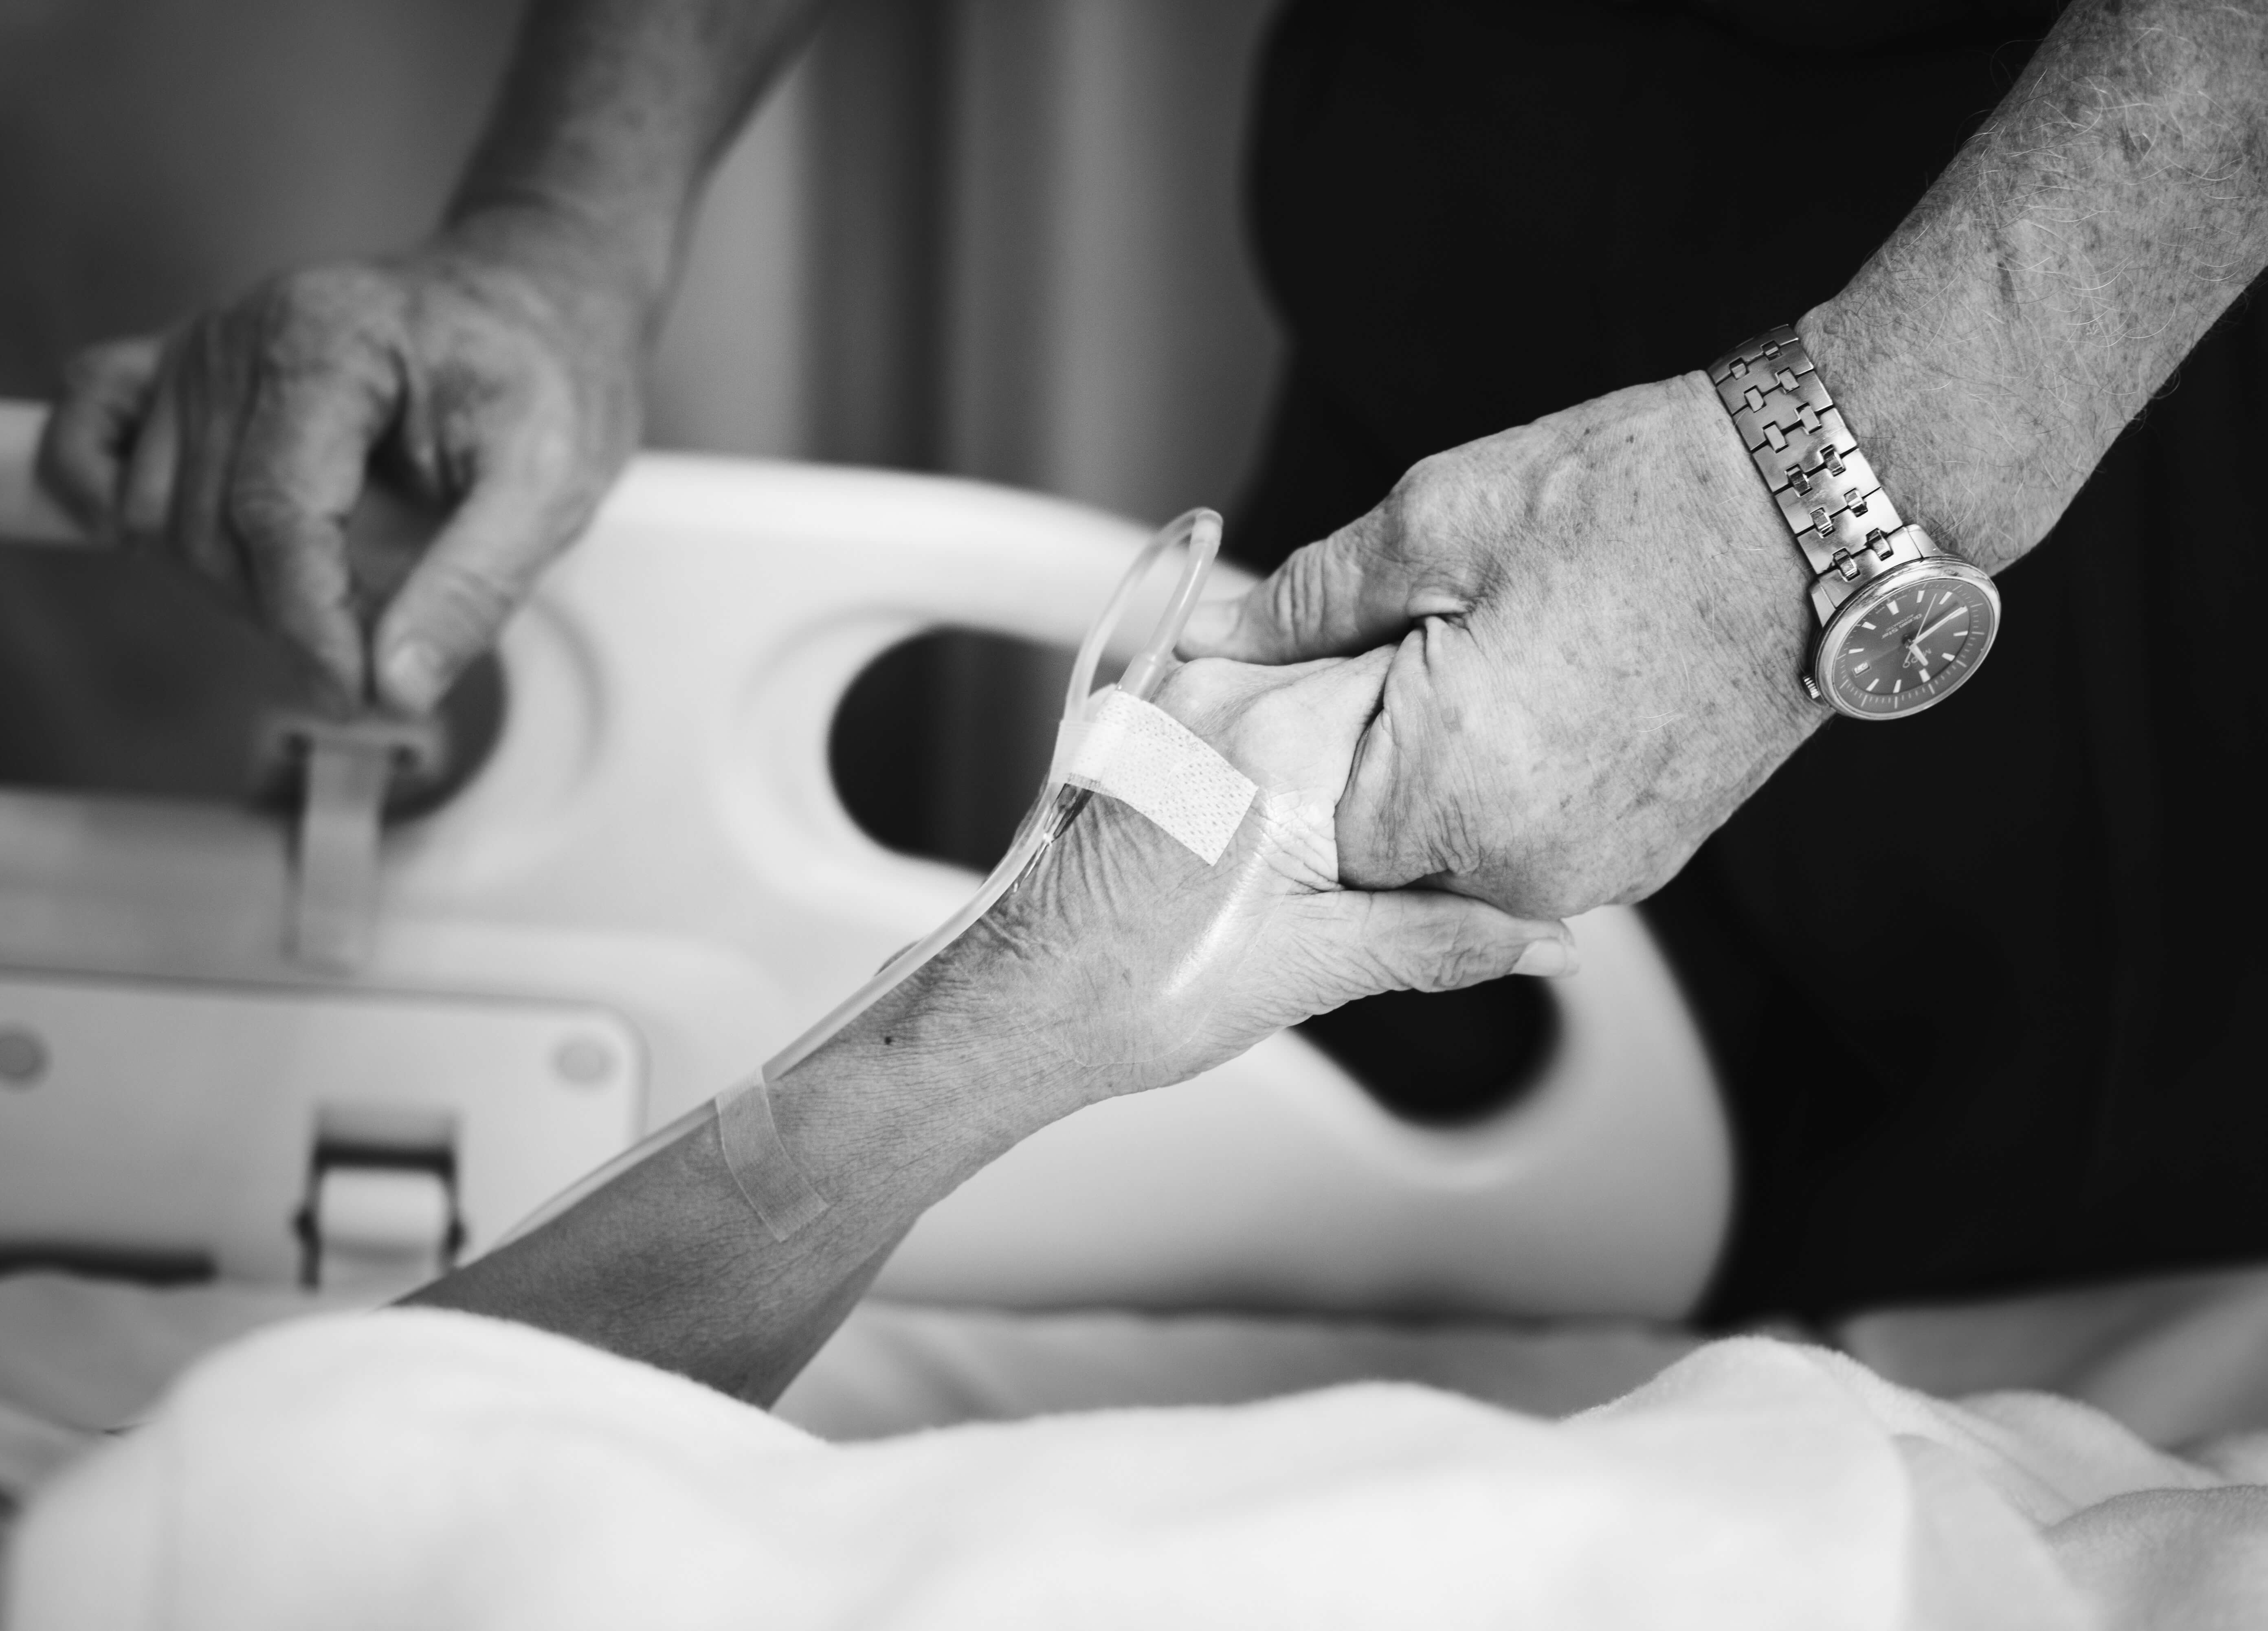 Nurse holds a patients hand in black and white.